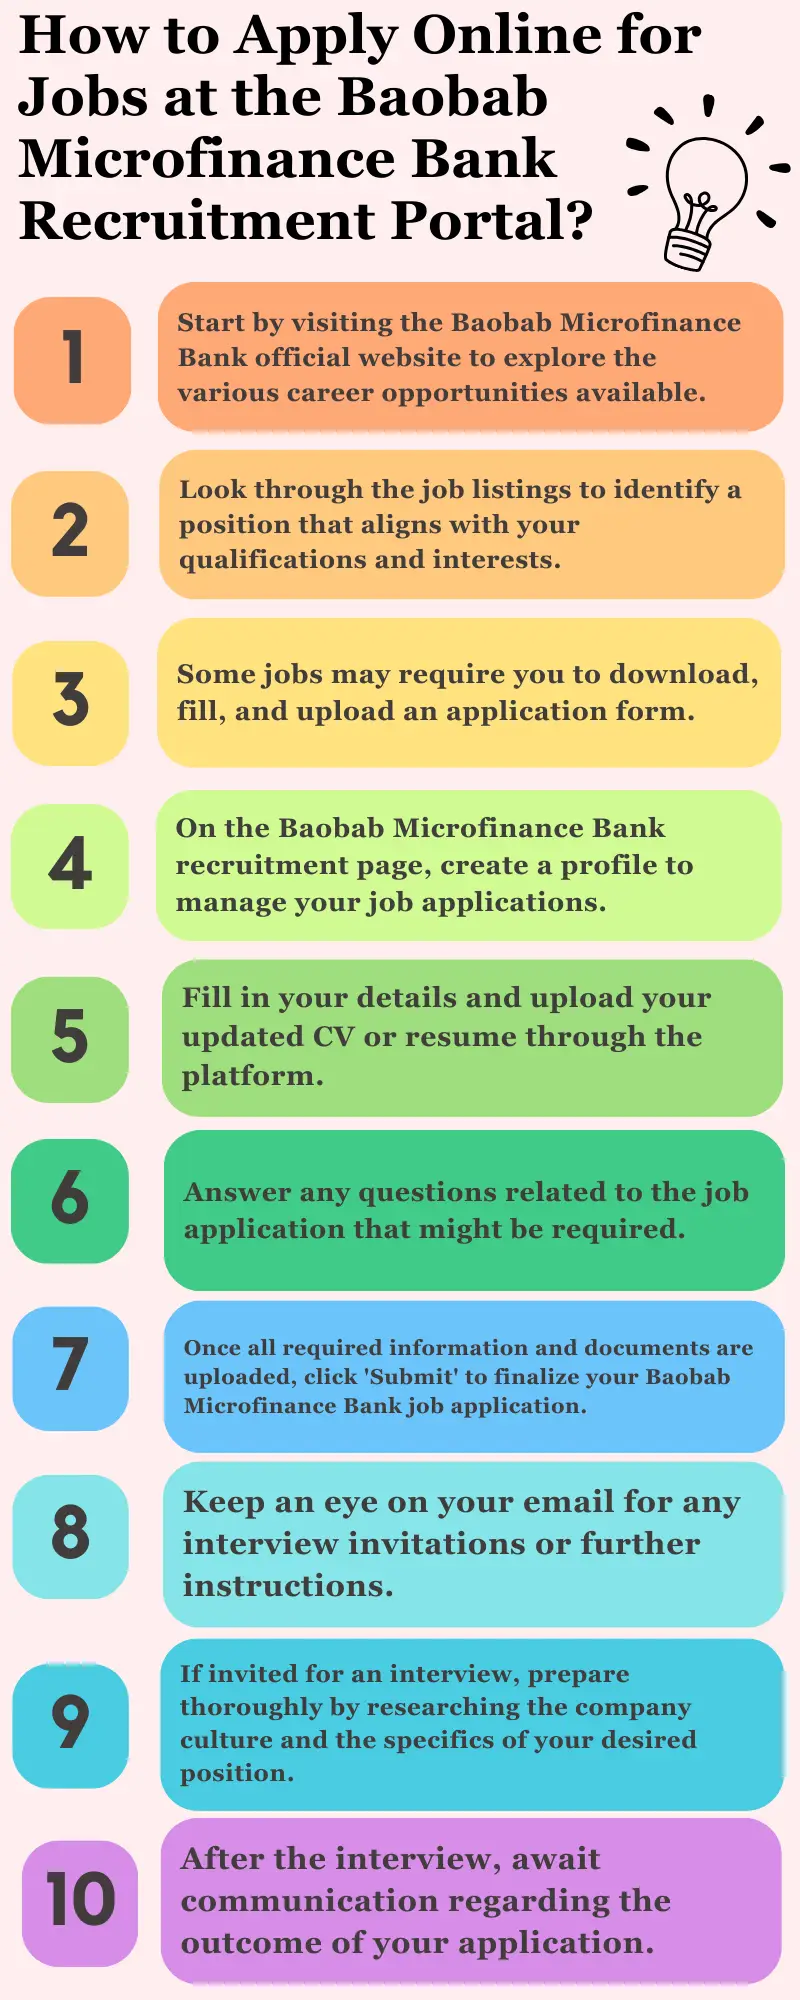 How to Apply Online for Jobs at the Baobab Microfinance Bank Recruitment Portal?